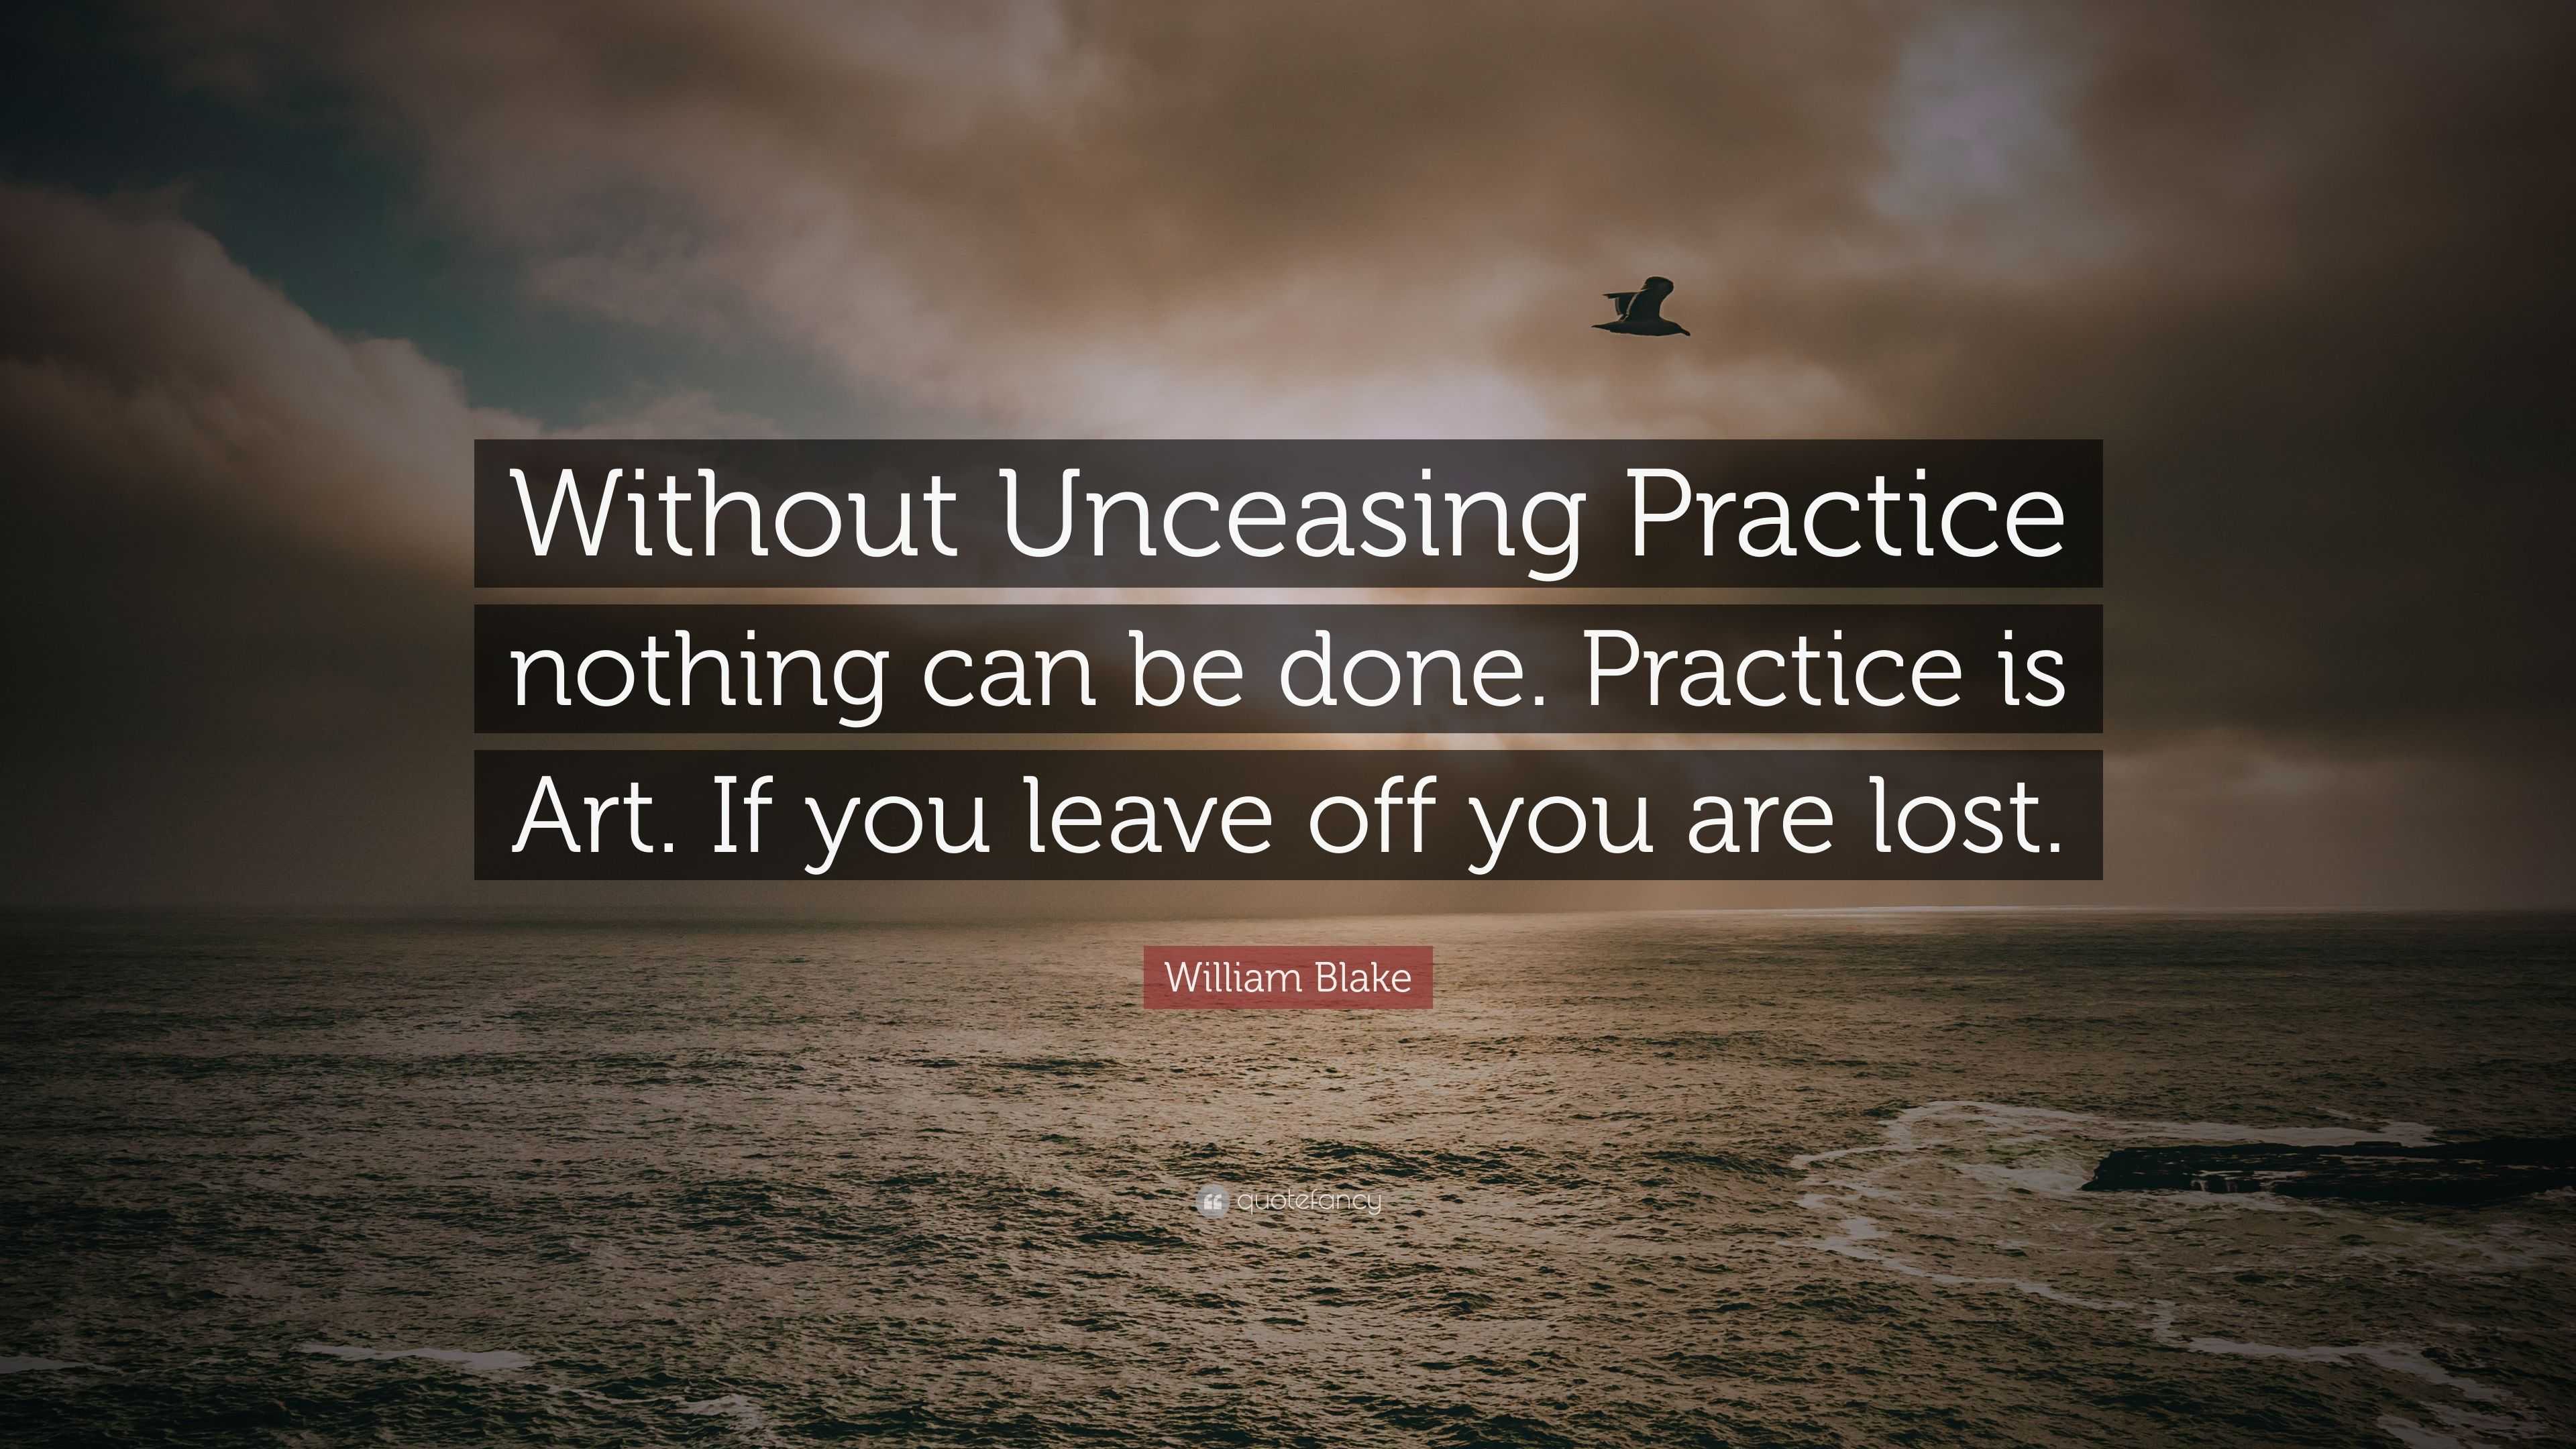 William Blake Quote: “Without Unceasing Practice nothing can be done ...